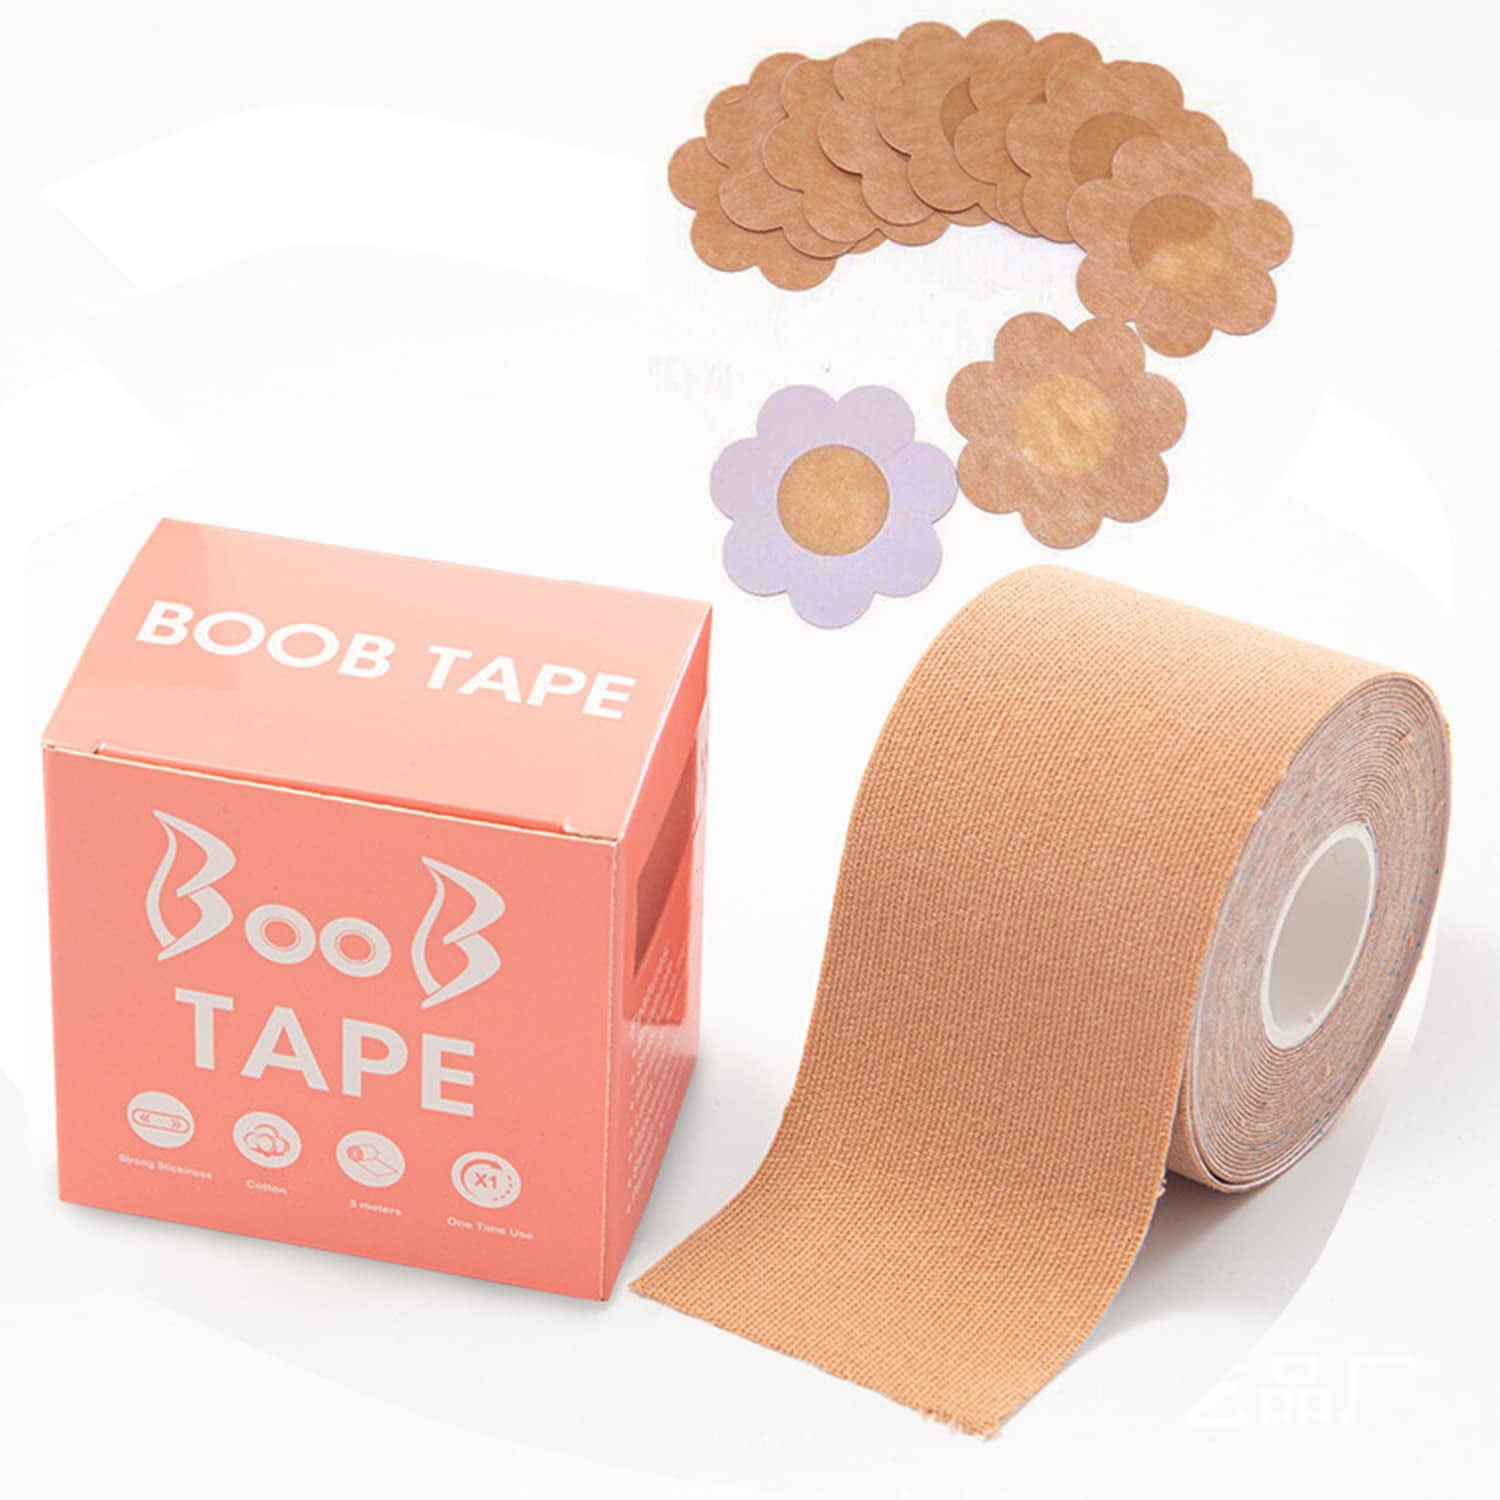 Boob Tape Replace Your Bra-Instant Tape Waterproof Sticky Boobytape Bob Tape  for Large Lift Plus Size from A to G Cup 1 Lift Tape, 5 Pairs Satin Petals  